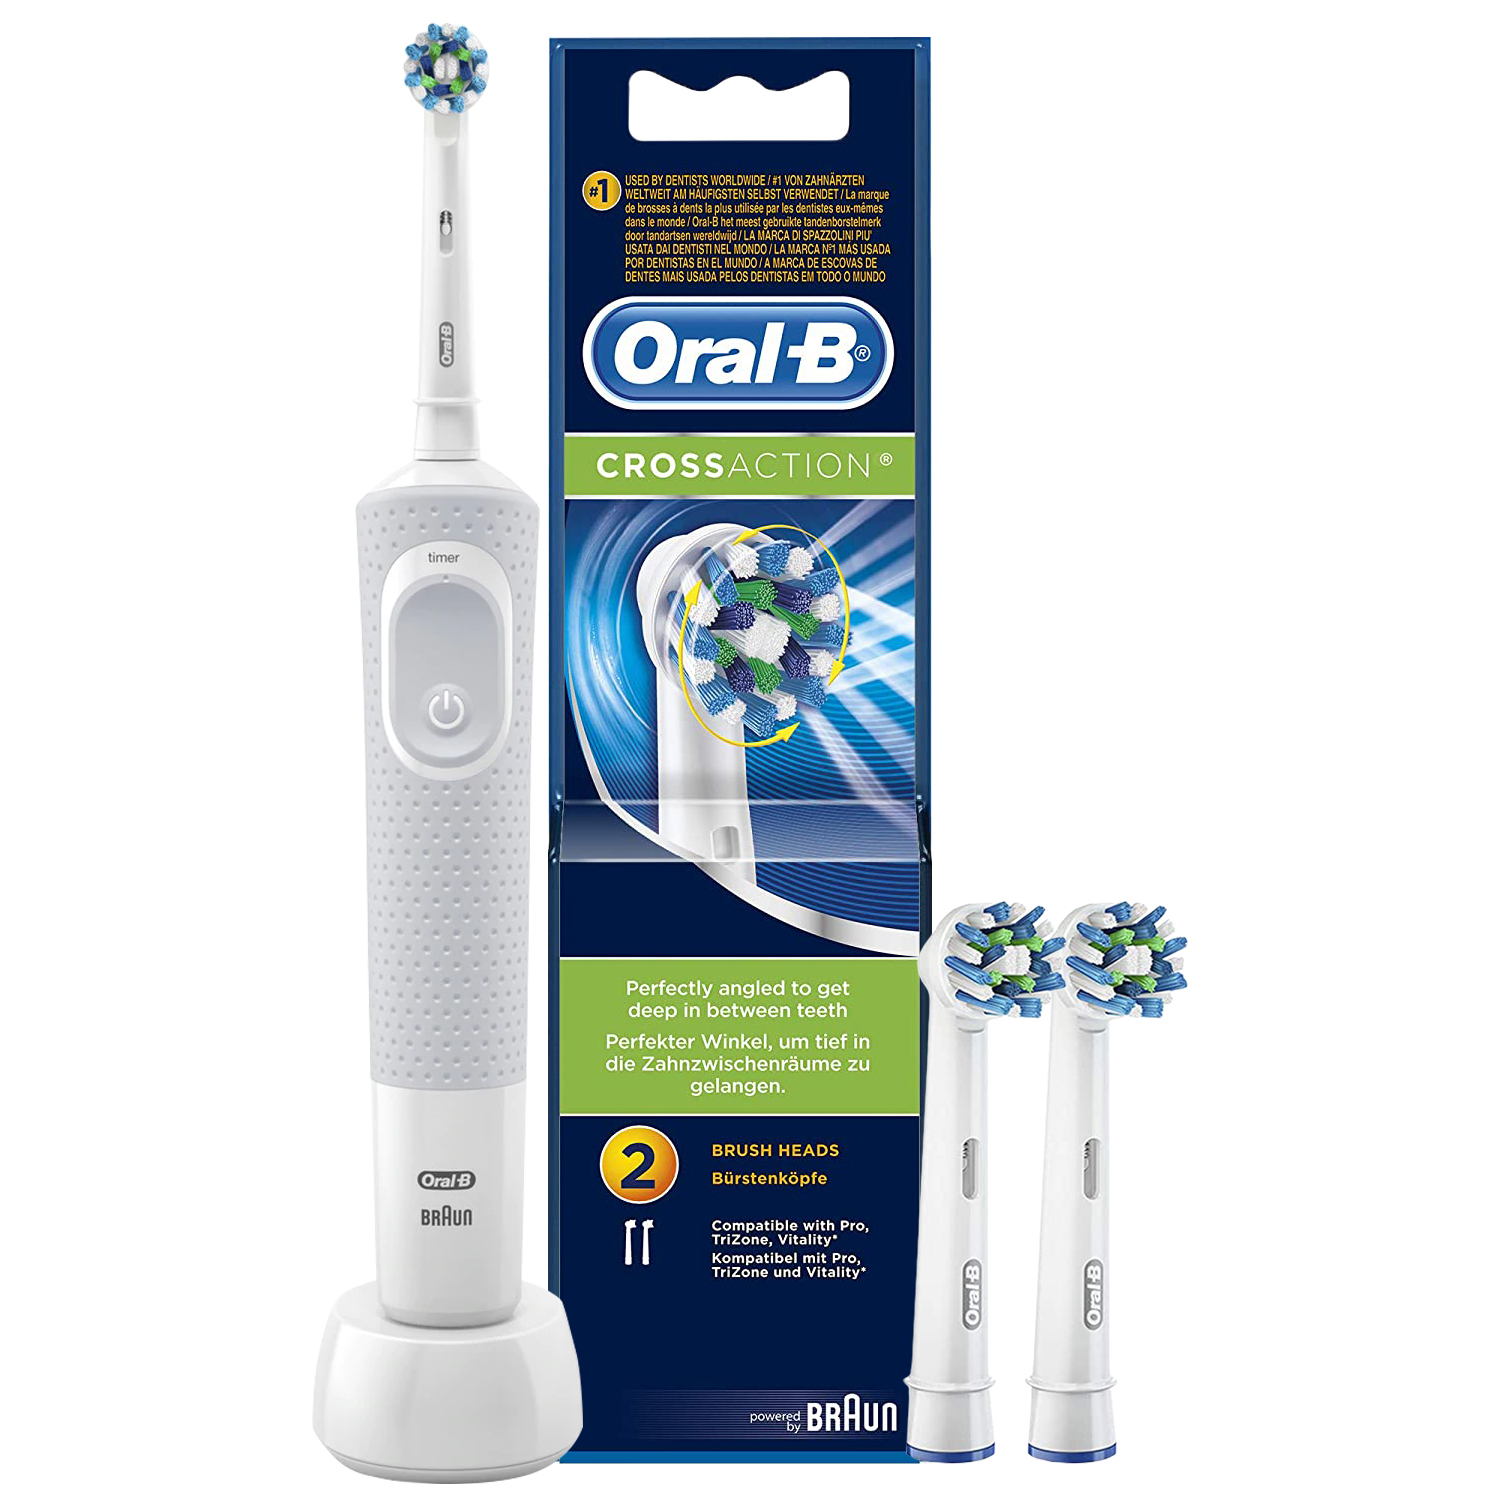 Oral-B Vitality 100 White Criss-Cross Bundle Pack - Electric Toothbrush and Replacement Heads